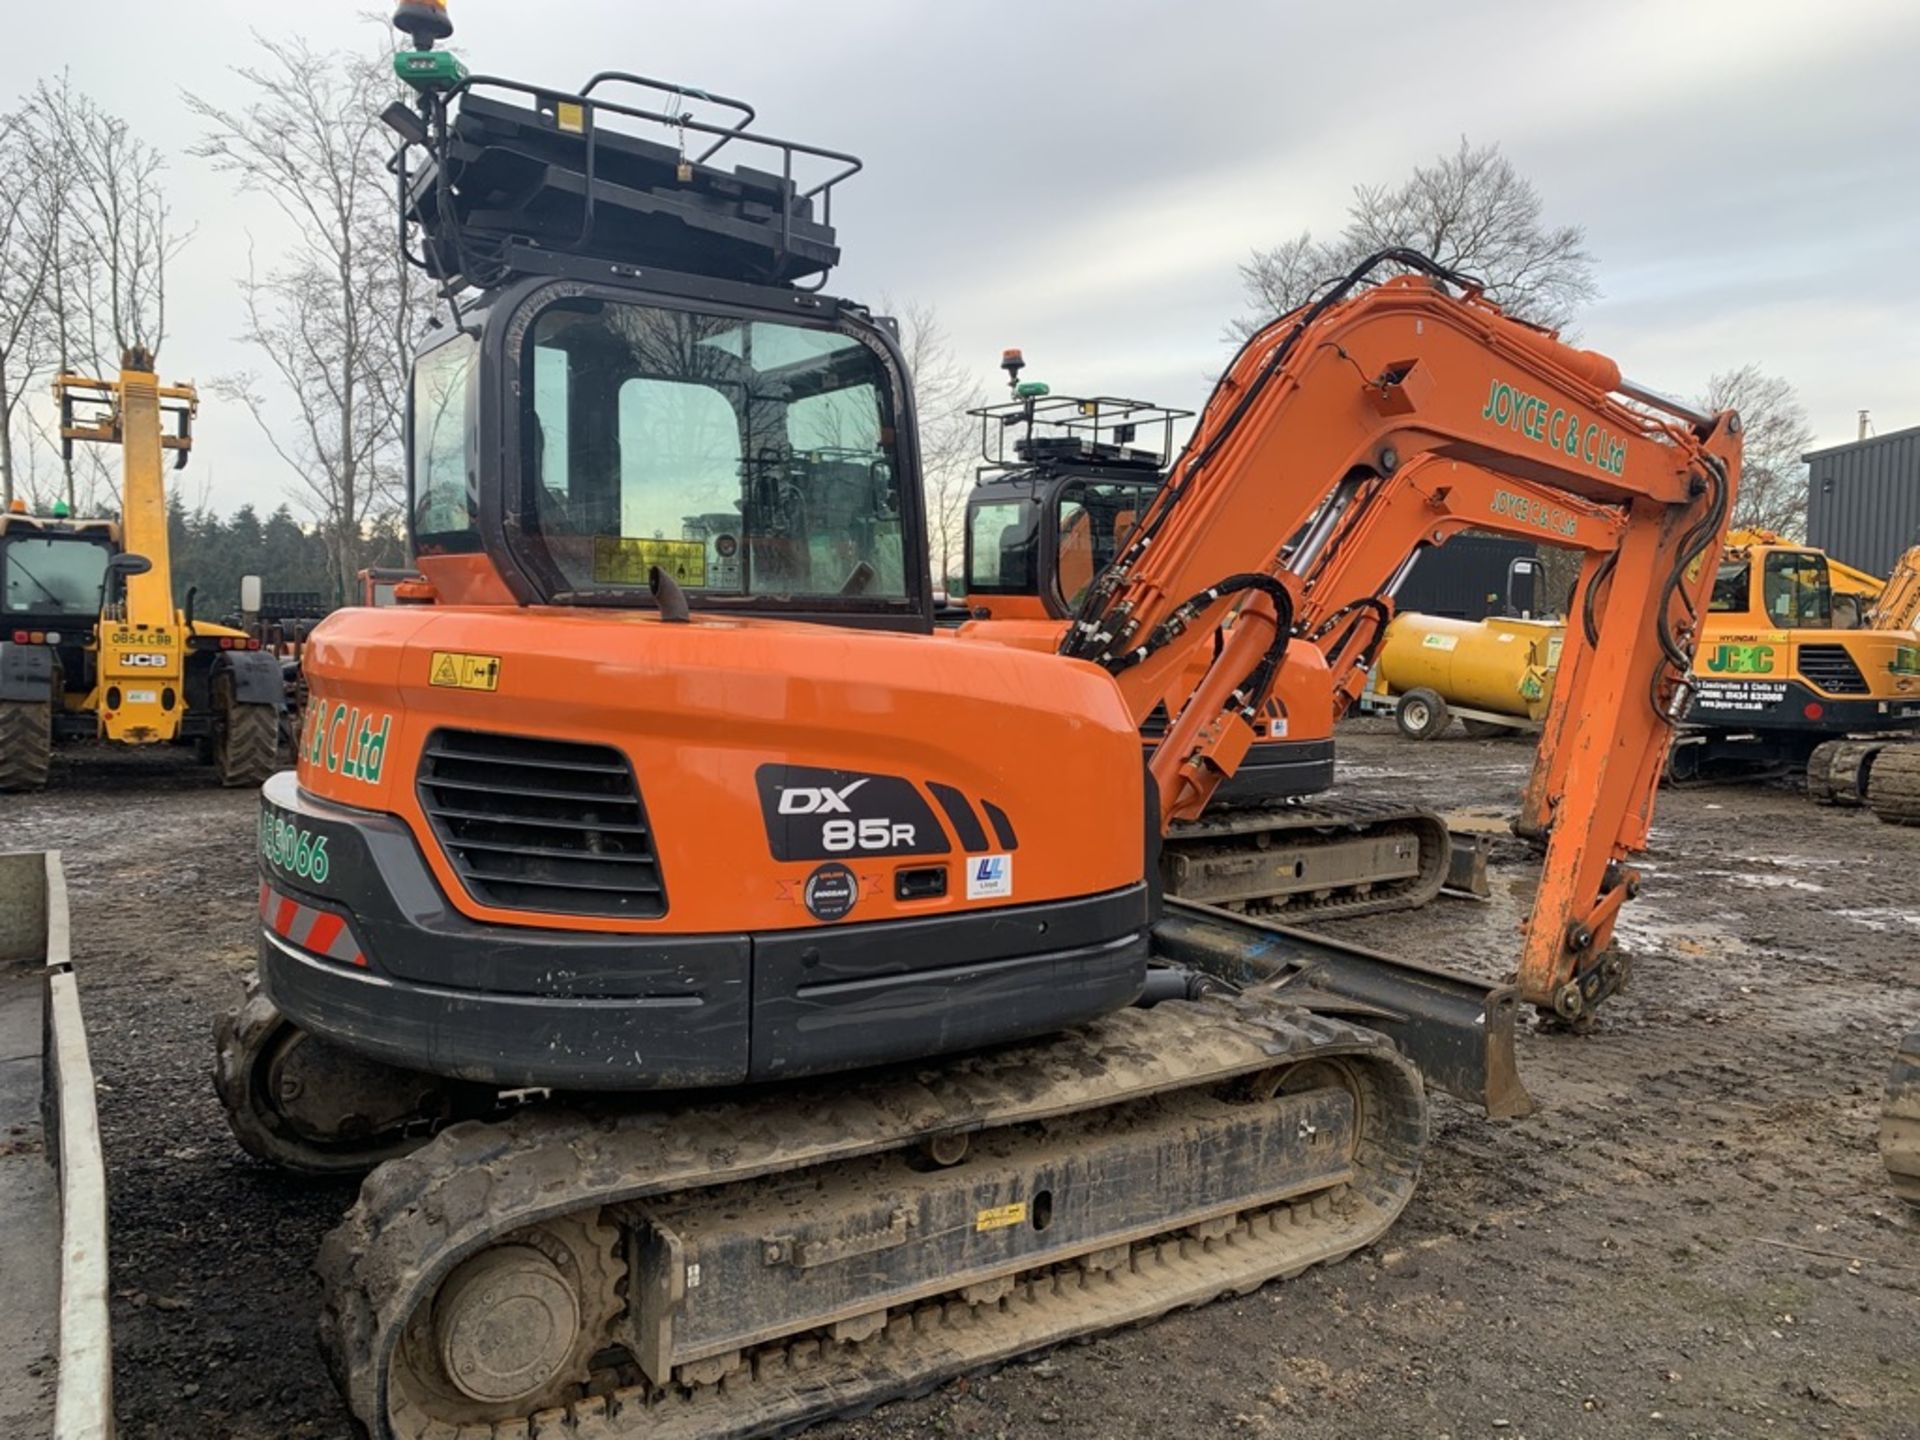 Doosan, DX85R-3 8.5 Ton Excavator Serial No. DHCKEAAVA6002265 Date of Manufacture: 2018 Rubber - Image 4 of 5